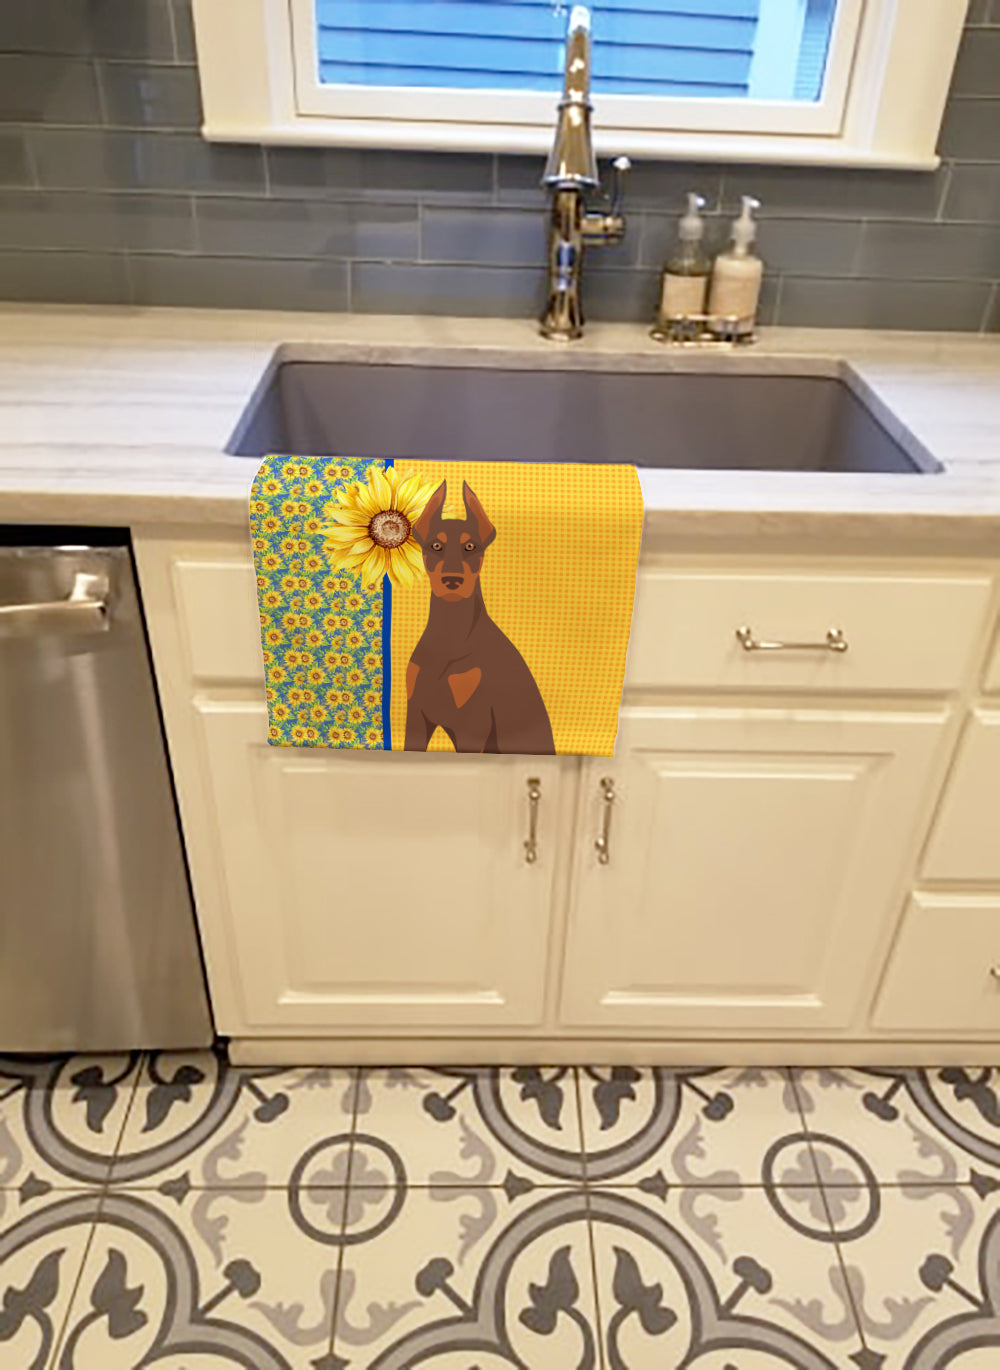 Buy this Summer Sunflowers Red and Tan Doberman Pinscher Kitchen Towel